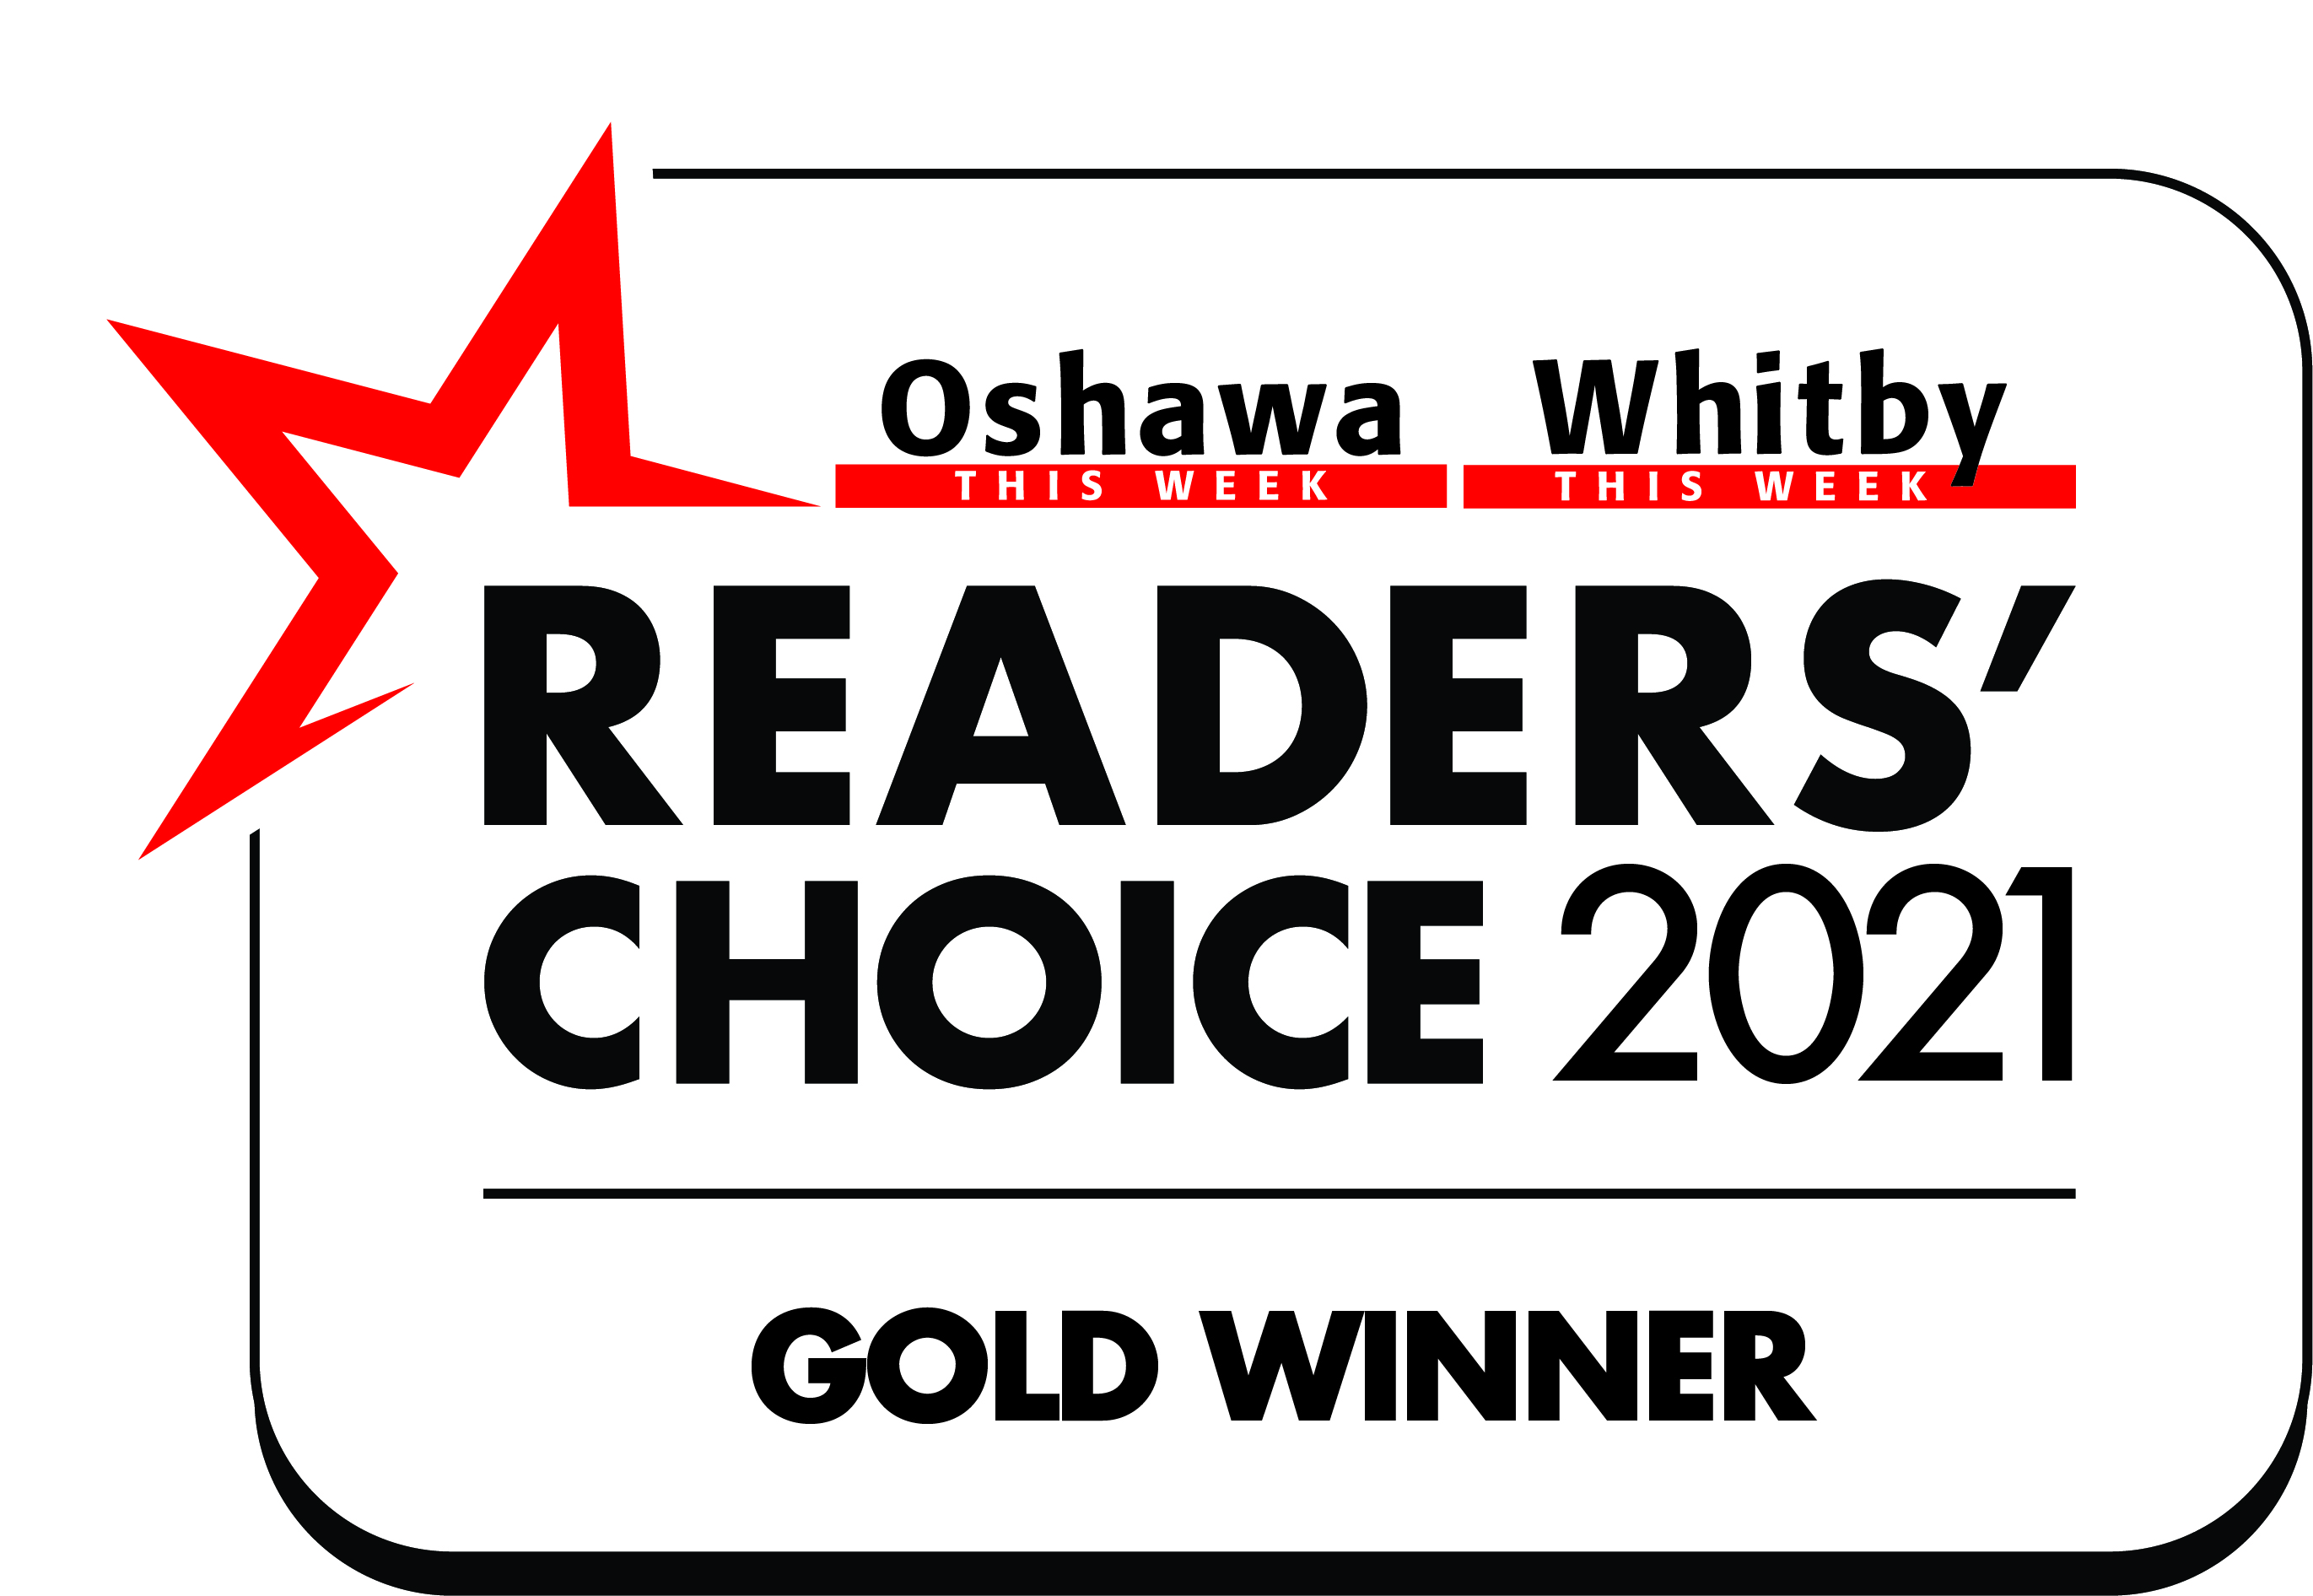 Readers' Choice Award for Best Learning Centre in Oshawa and Whitby